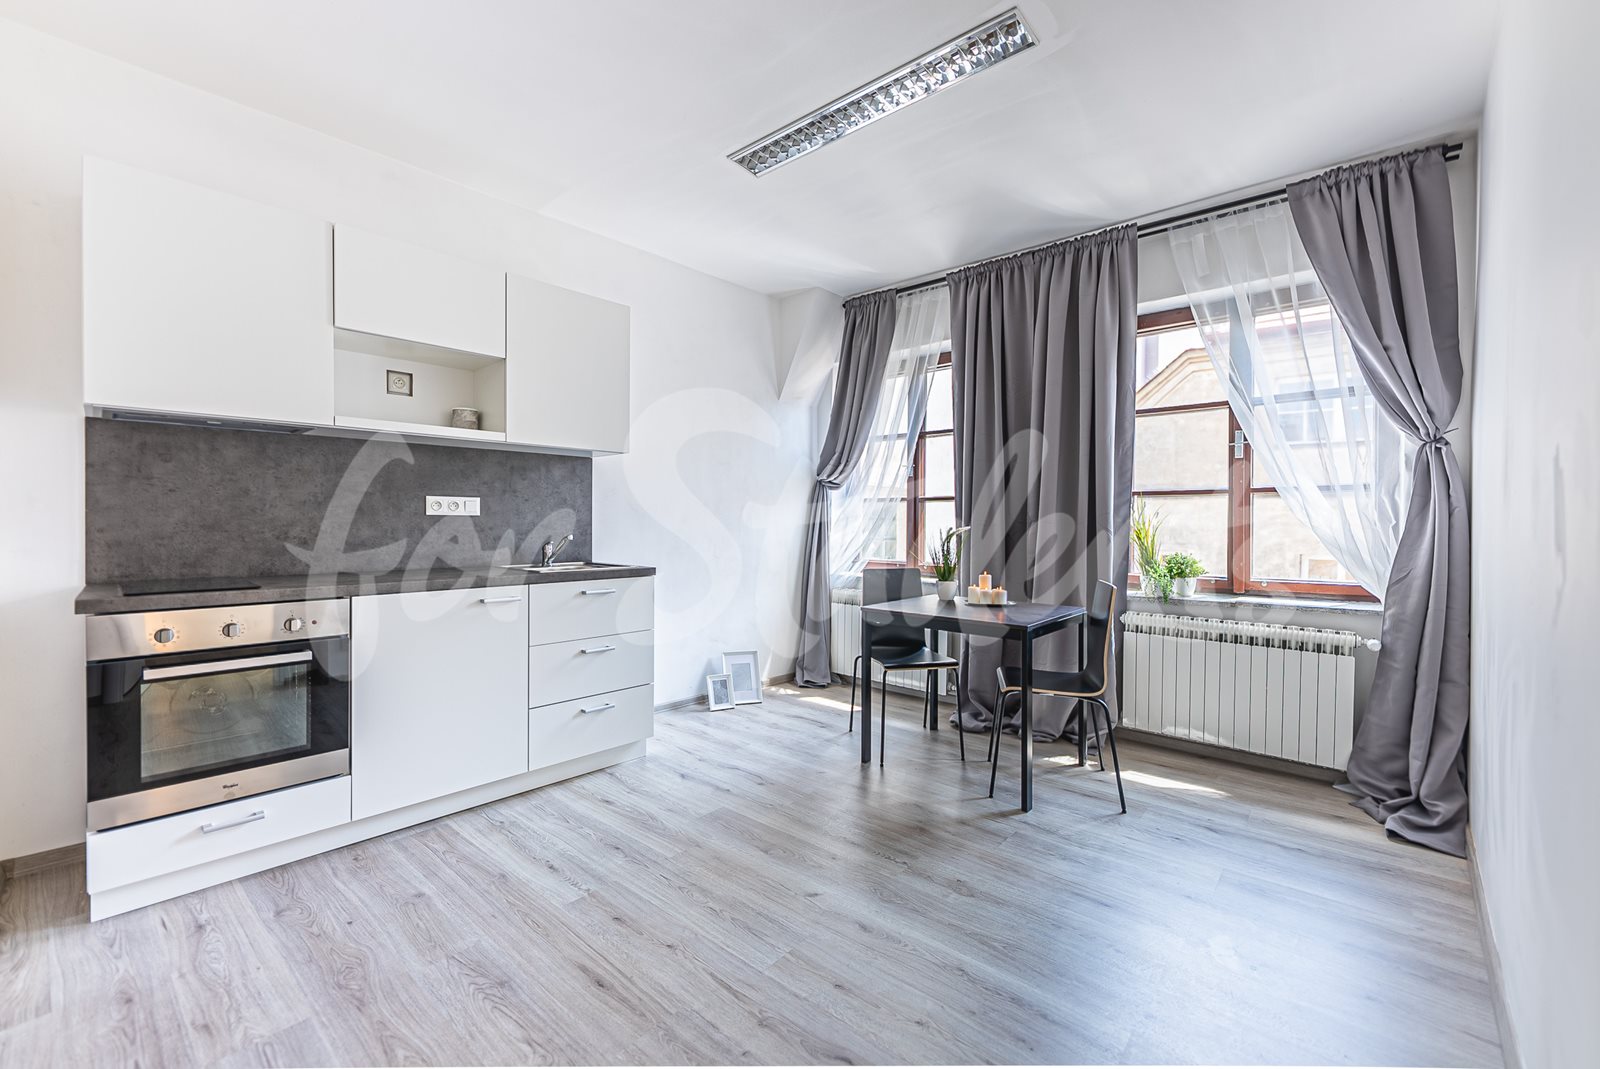 Newly bright reconstructed one bedroom apartment in city centre, Hradec Králové